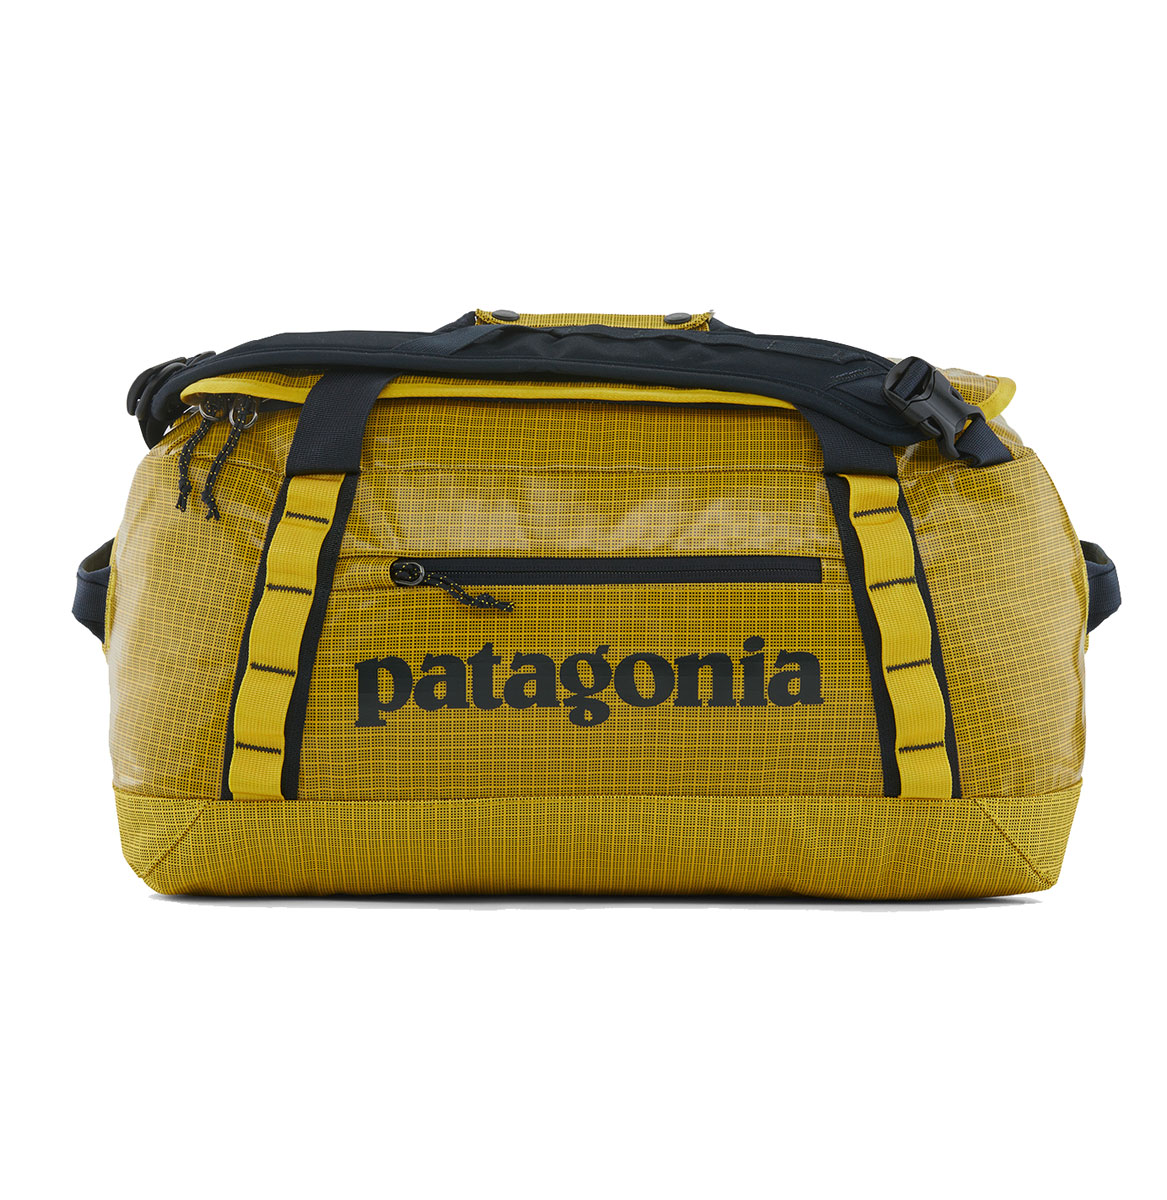 Patagonia Black Hole Duffel 40L - Luggage, Packs, Vests Chicago Fly Fishing Outfitters | ChiFly.com